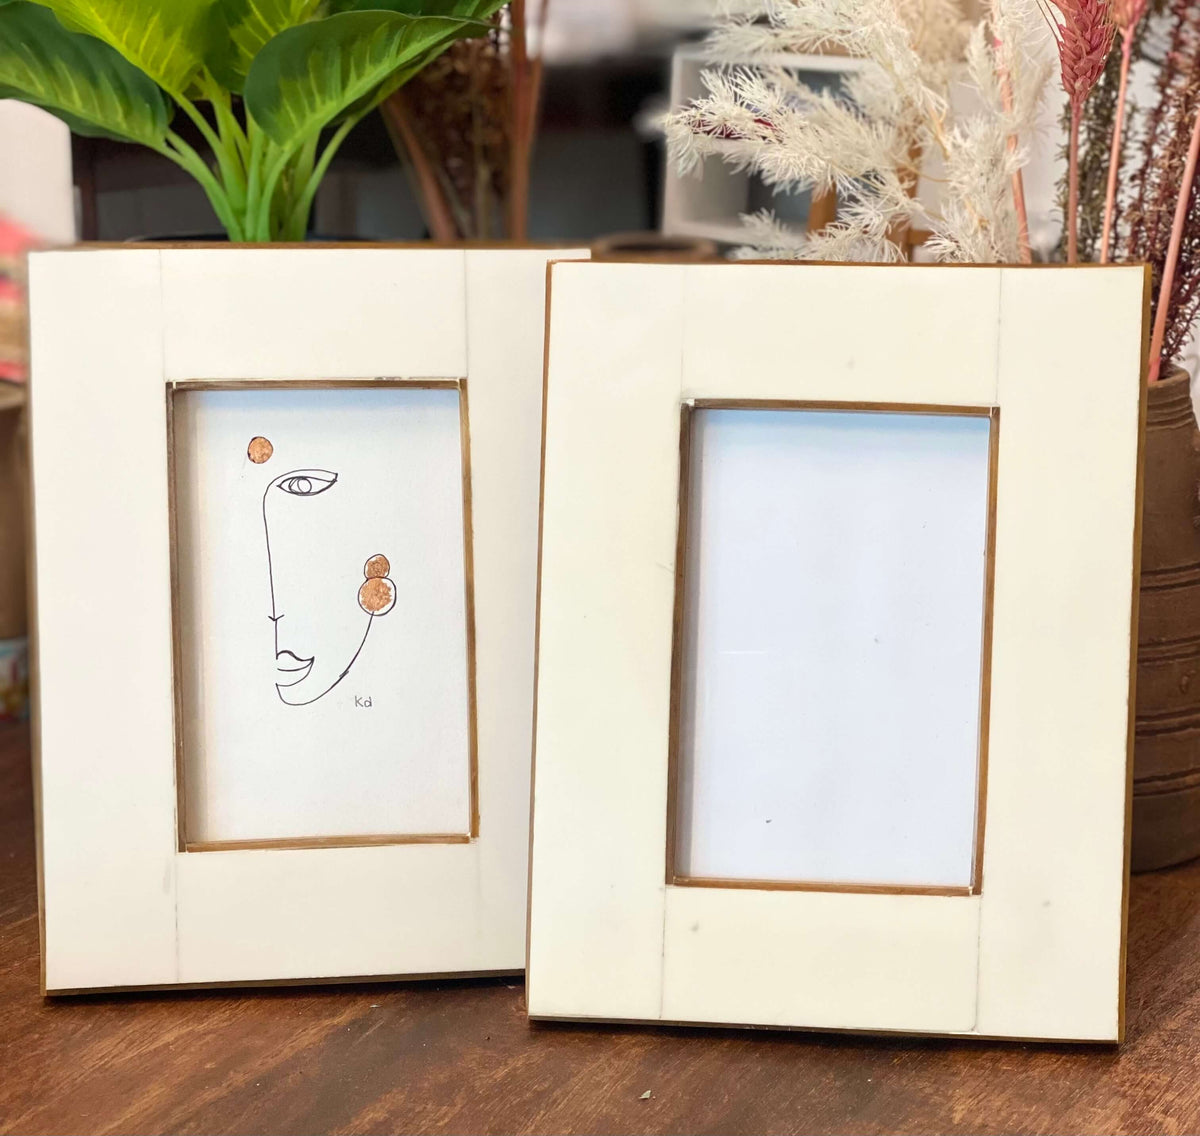 Small Picture Frames 4X6/5X7/8X10 Inch Vintage Decorative Resin